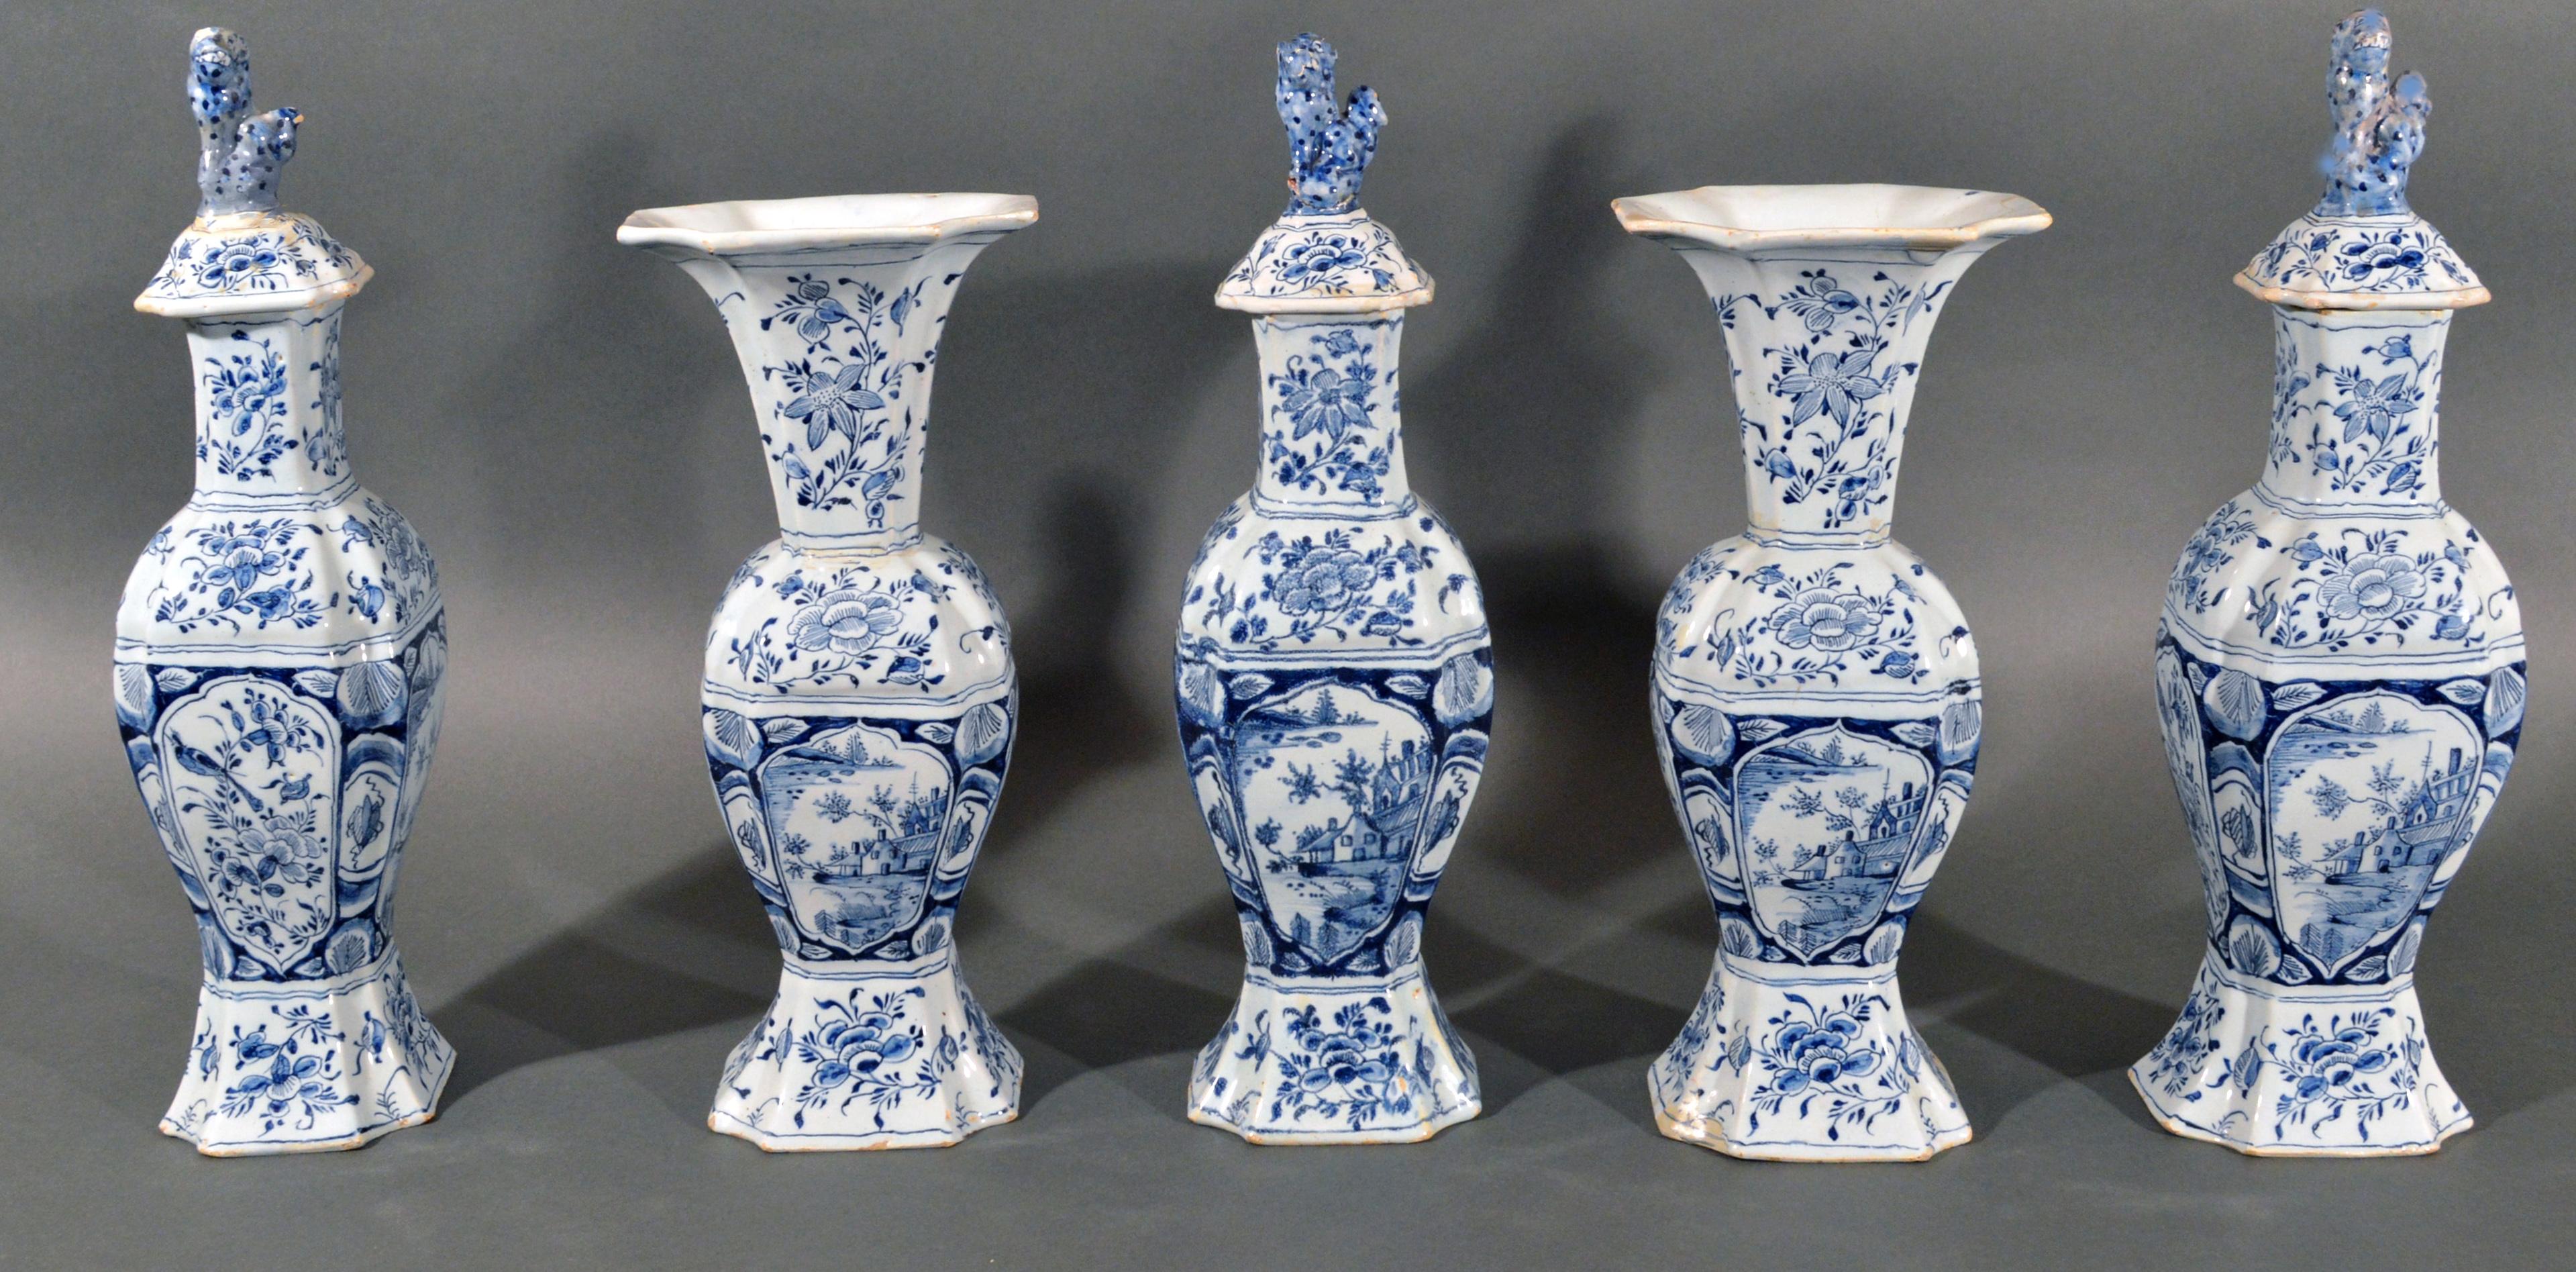 Dutch Delft blue & white five-piece Chinoiserie garniture,
Early to mid-18th century


A lot of Delft garniturs are late 19th century. This set is early after a Chinese Kangxi design - they look amazing
The Dutch delft blue and white tin-glazed